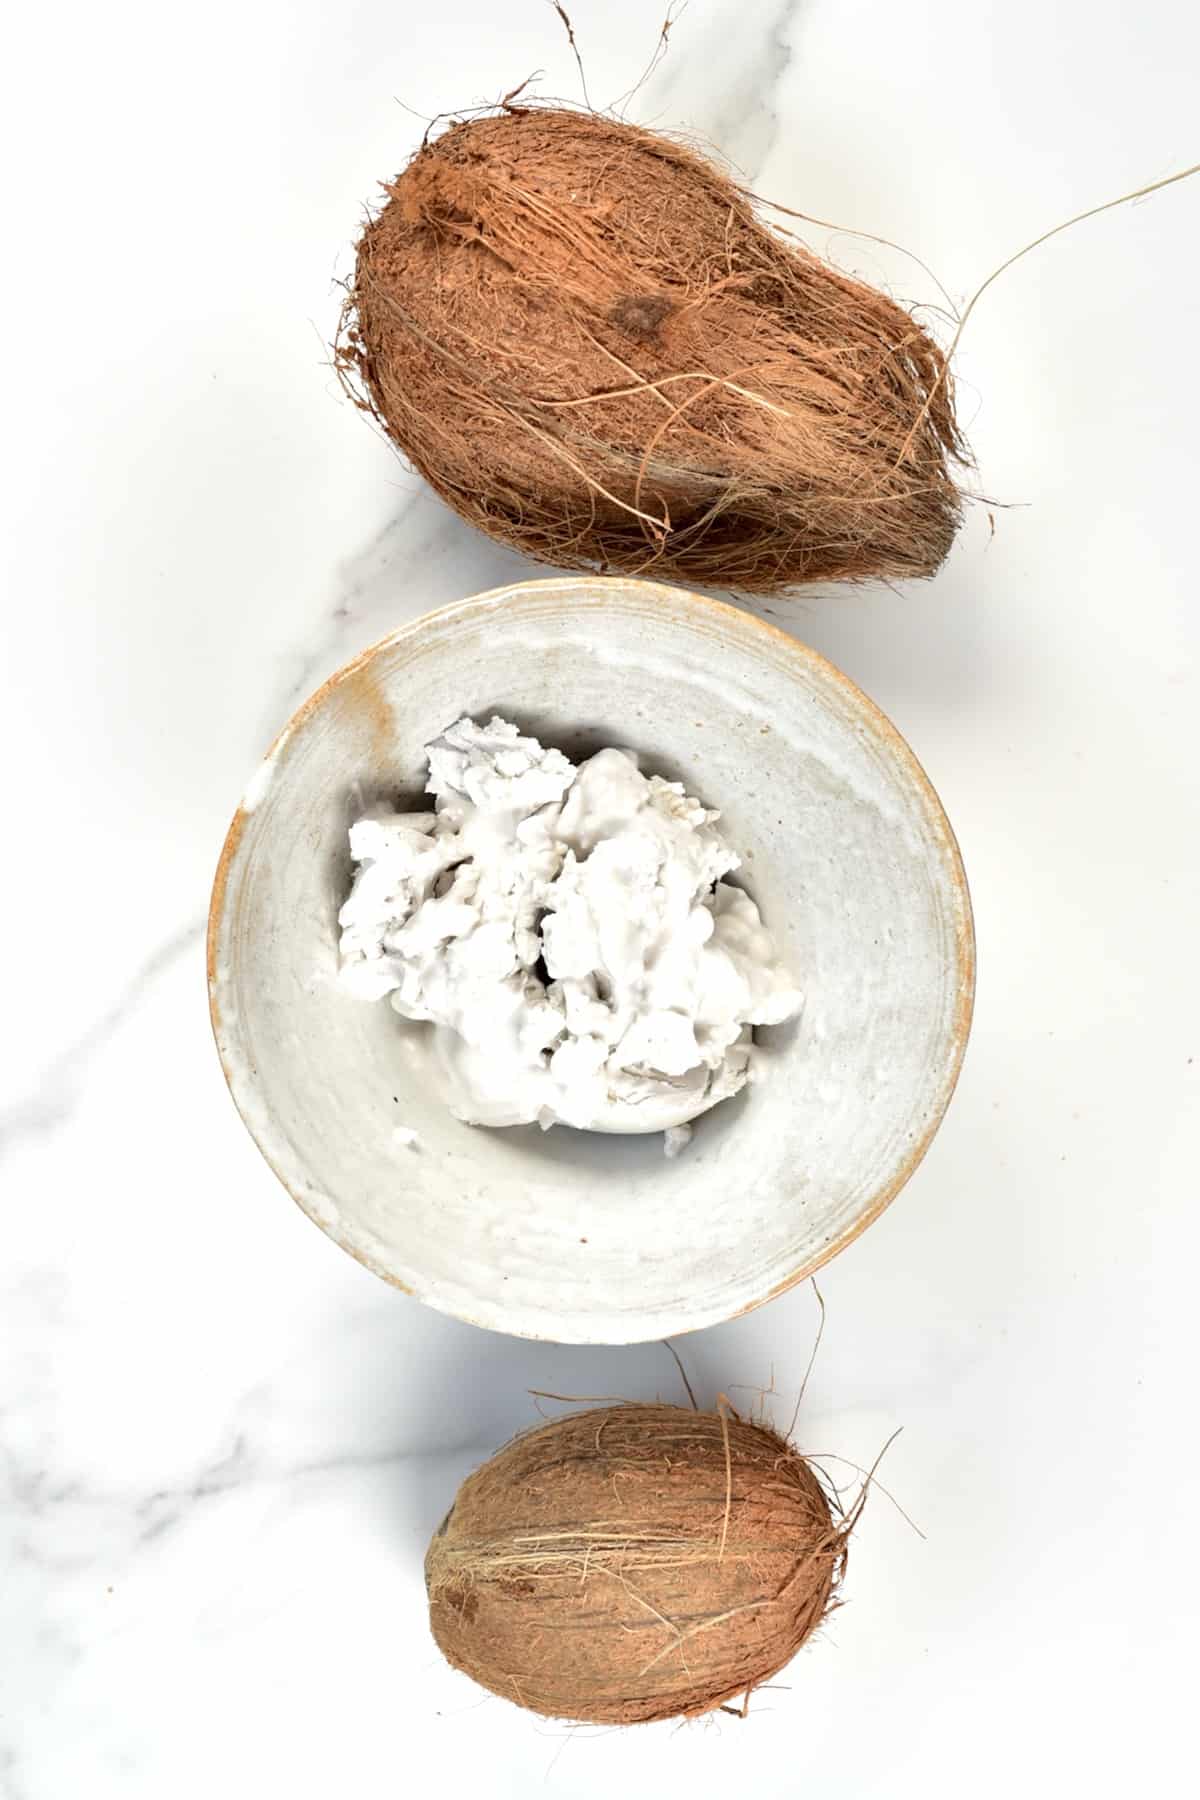 Coconut cream in a bowl and two coconuts on a white surface